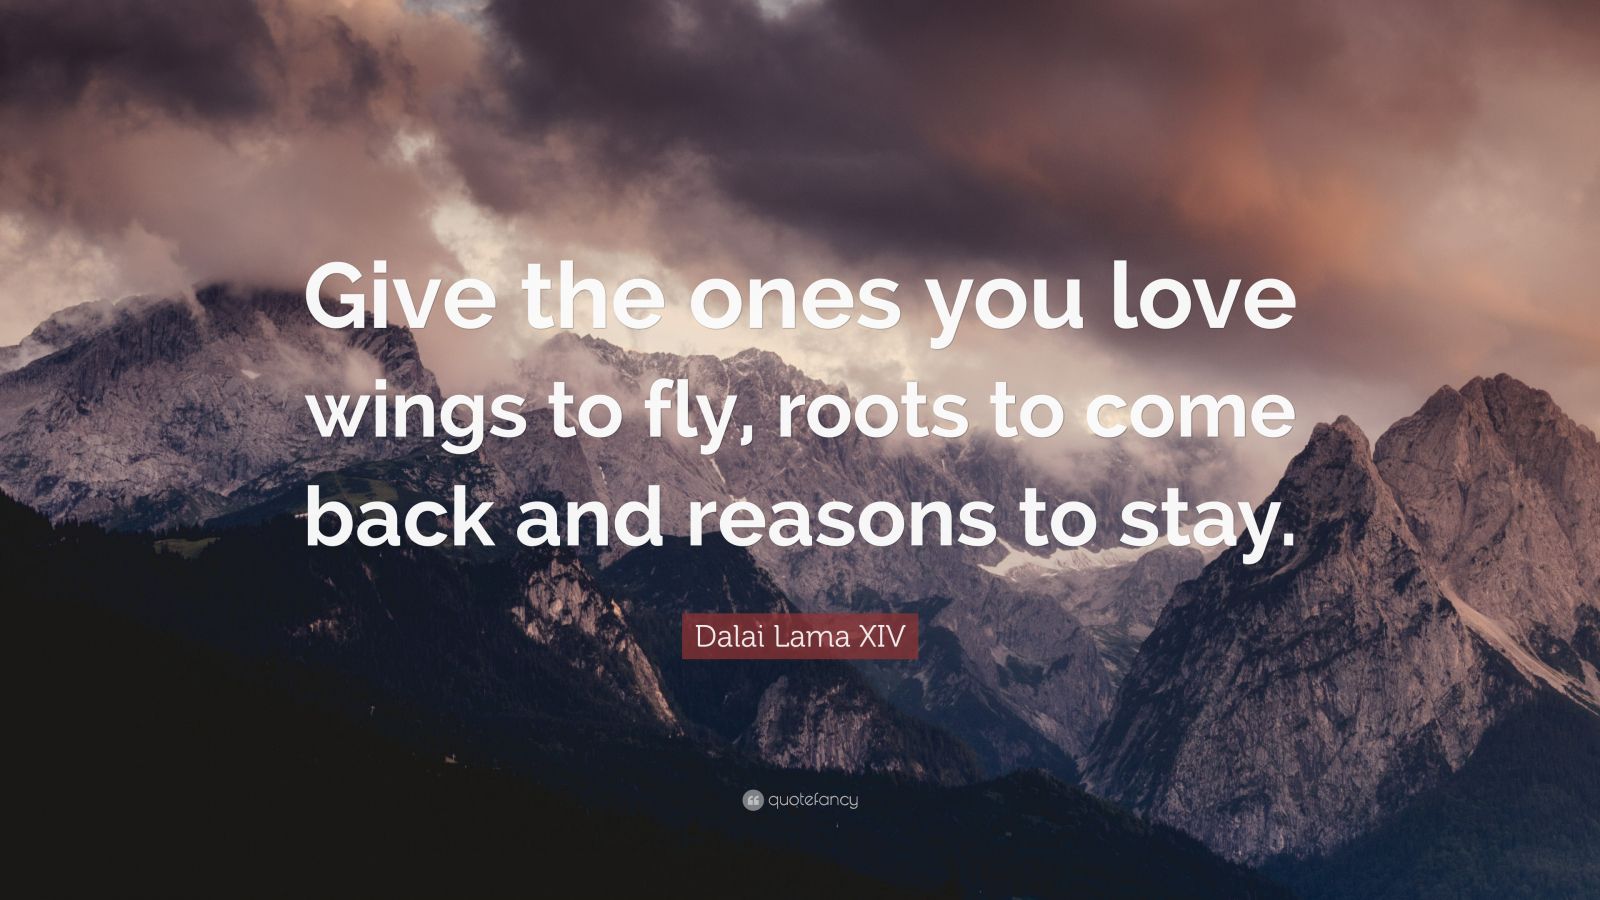 Dalai Lama XIV Quote: “Give the ones you love wings to fly, roots to